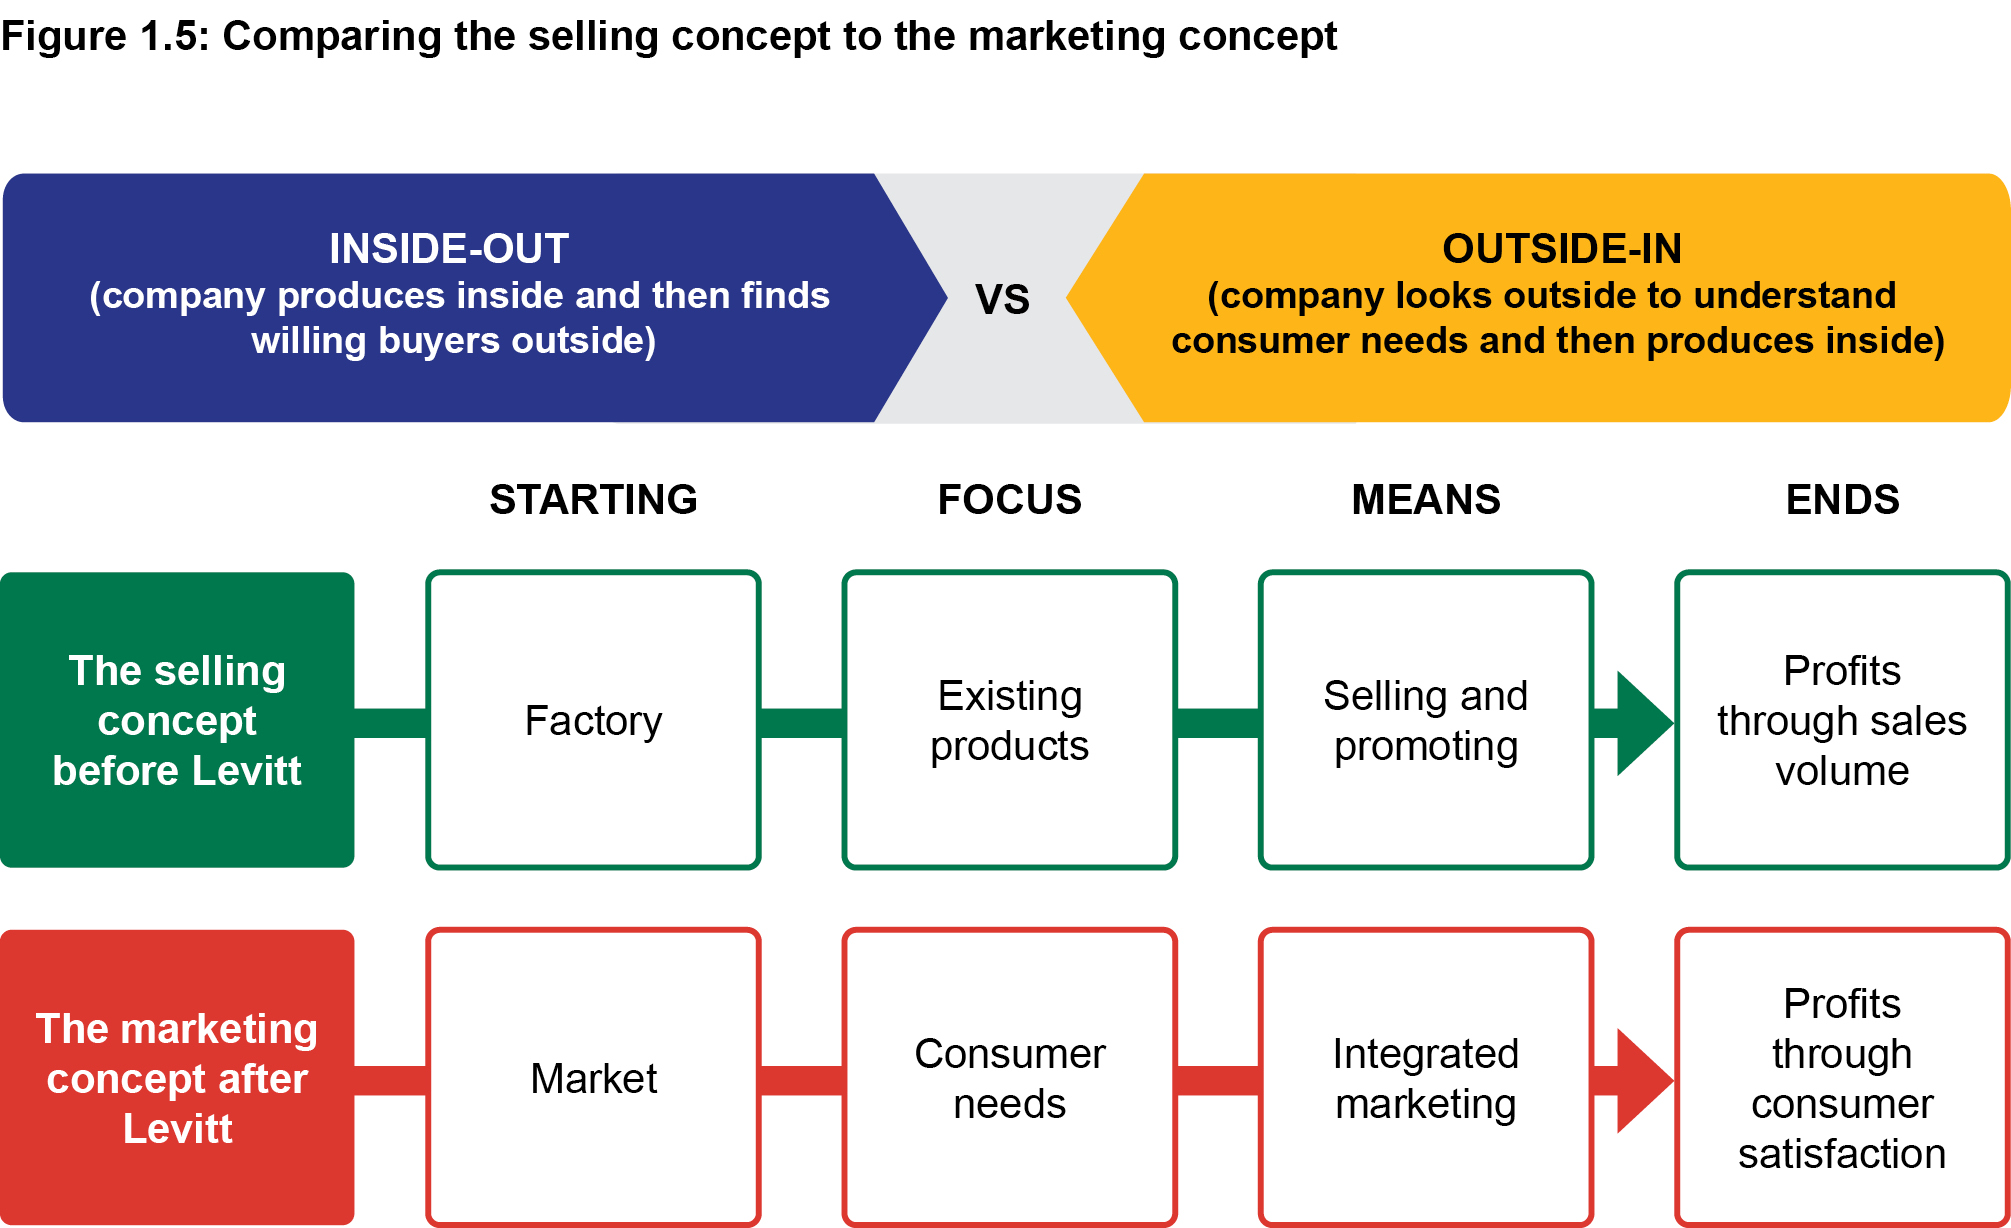 Figure 1.5: Comparing the selling concept to the marketing concept